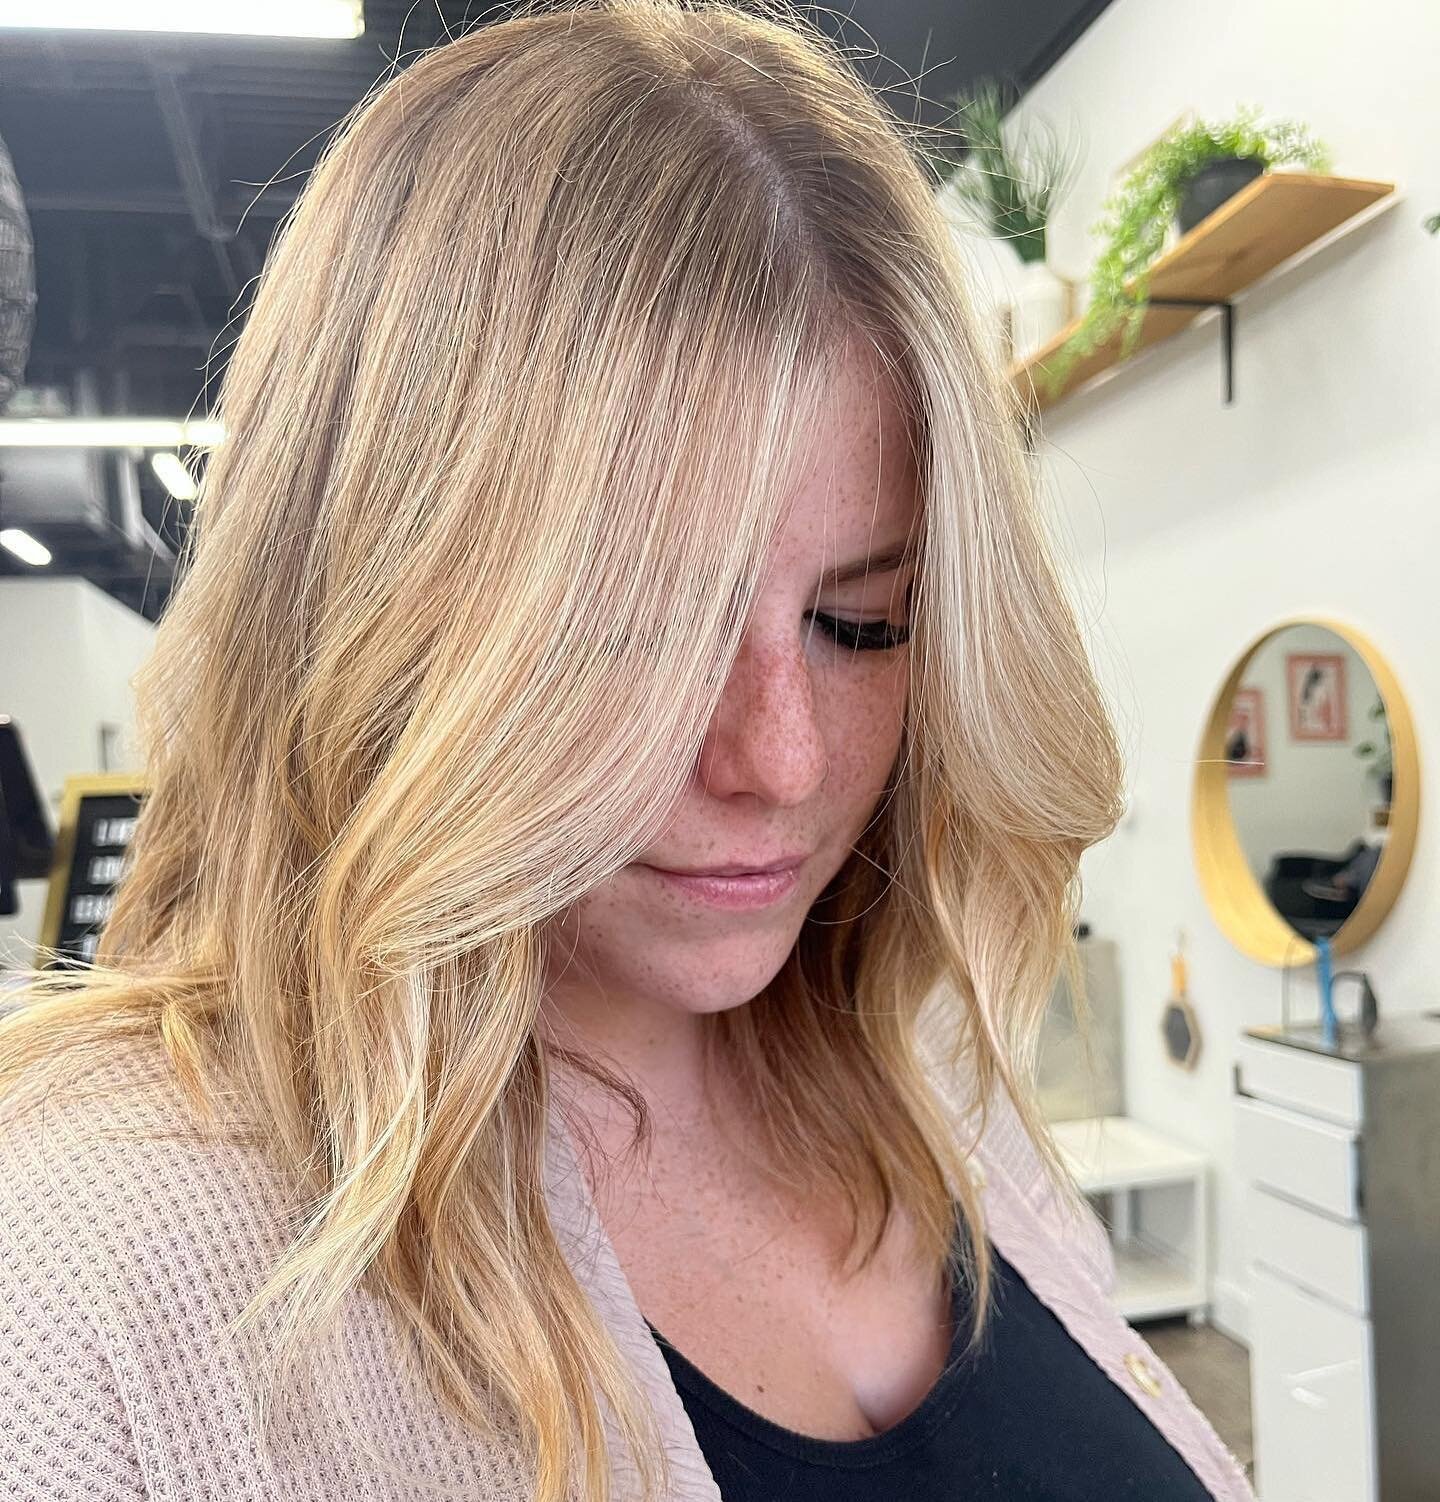 Repost from @chelsphillips
&bull;
So fun working this beautiful head of hair and human more lived in and blondie today!
@drakenelsonsalon 

#tacomahair #tacomahairstylist #drakenelsonsalon #gigharborhair #livedinhair #tacomasalon #balayage #foilayage